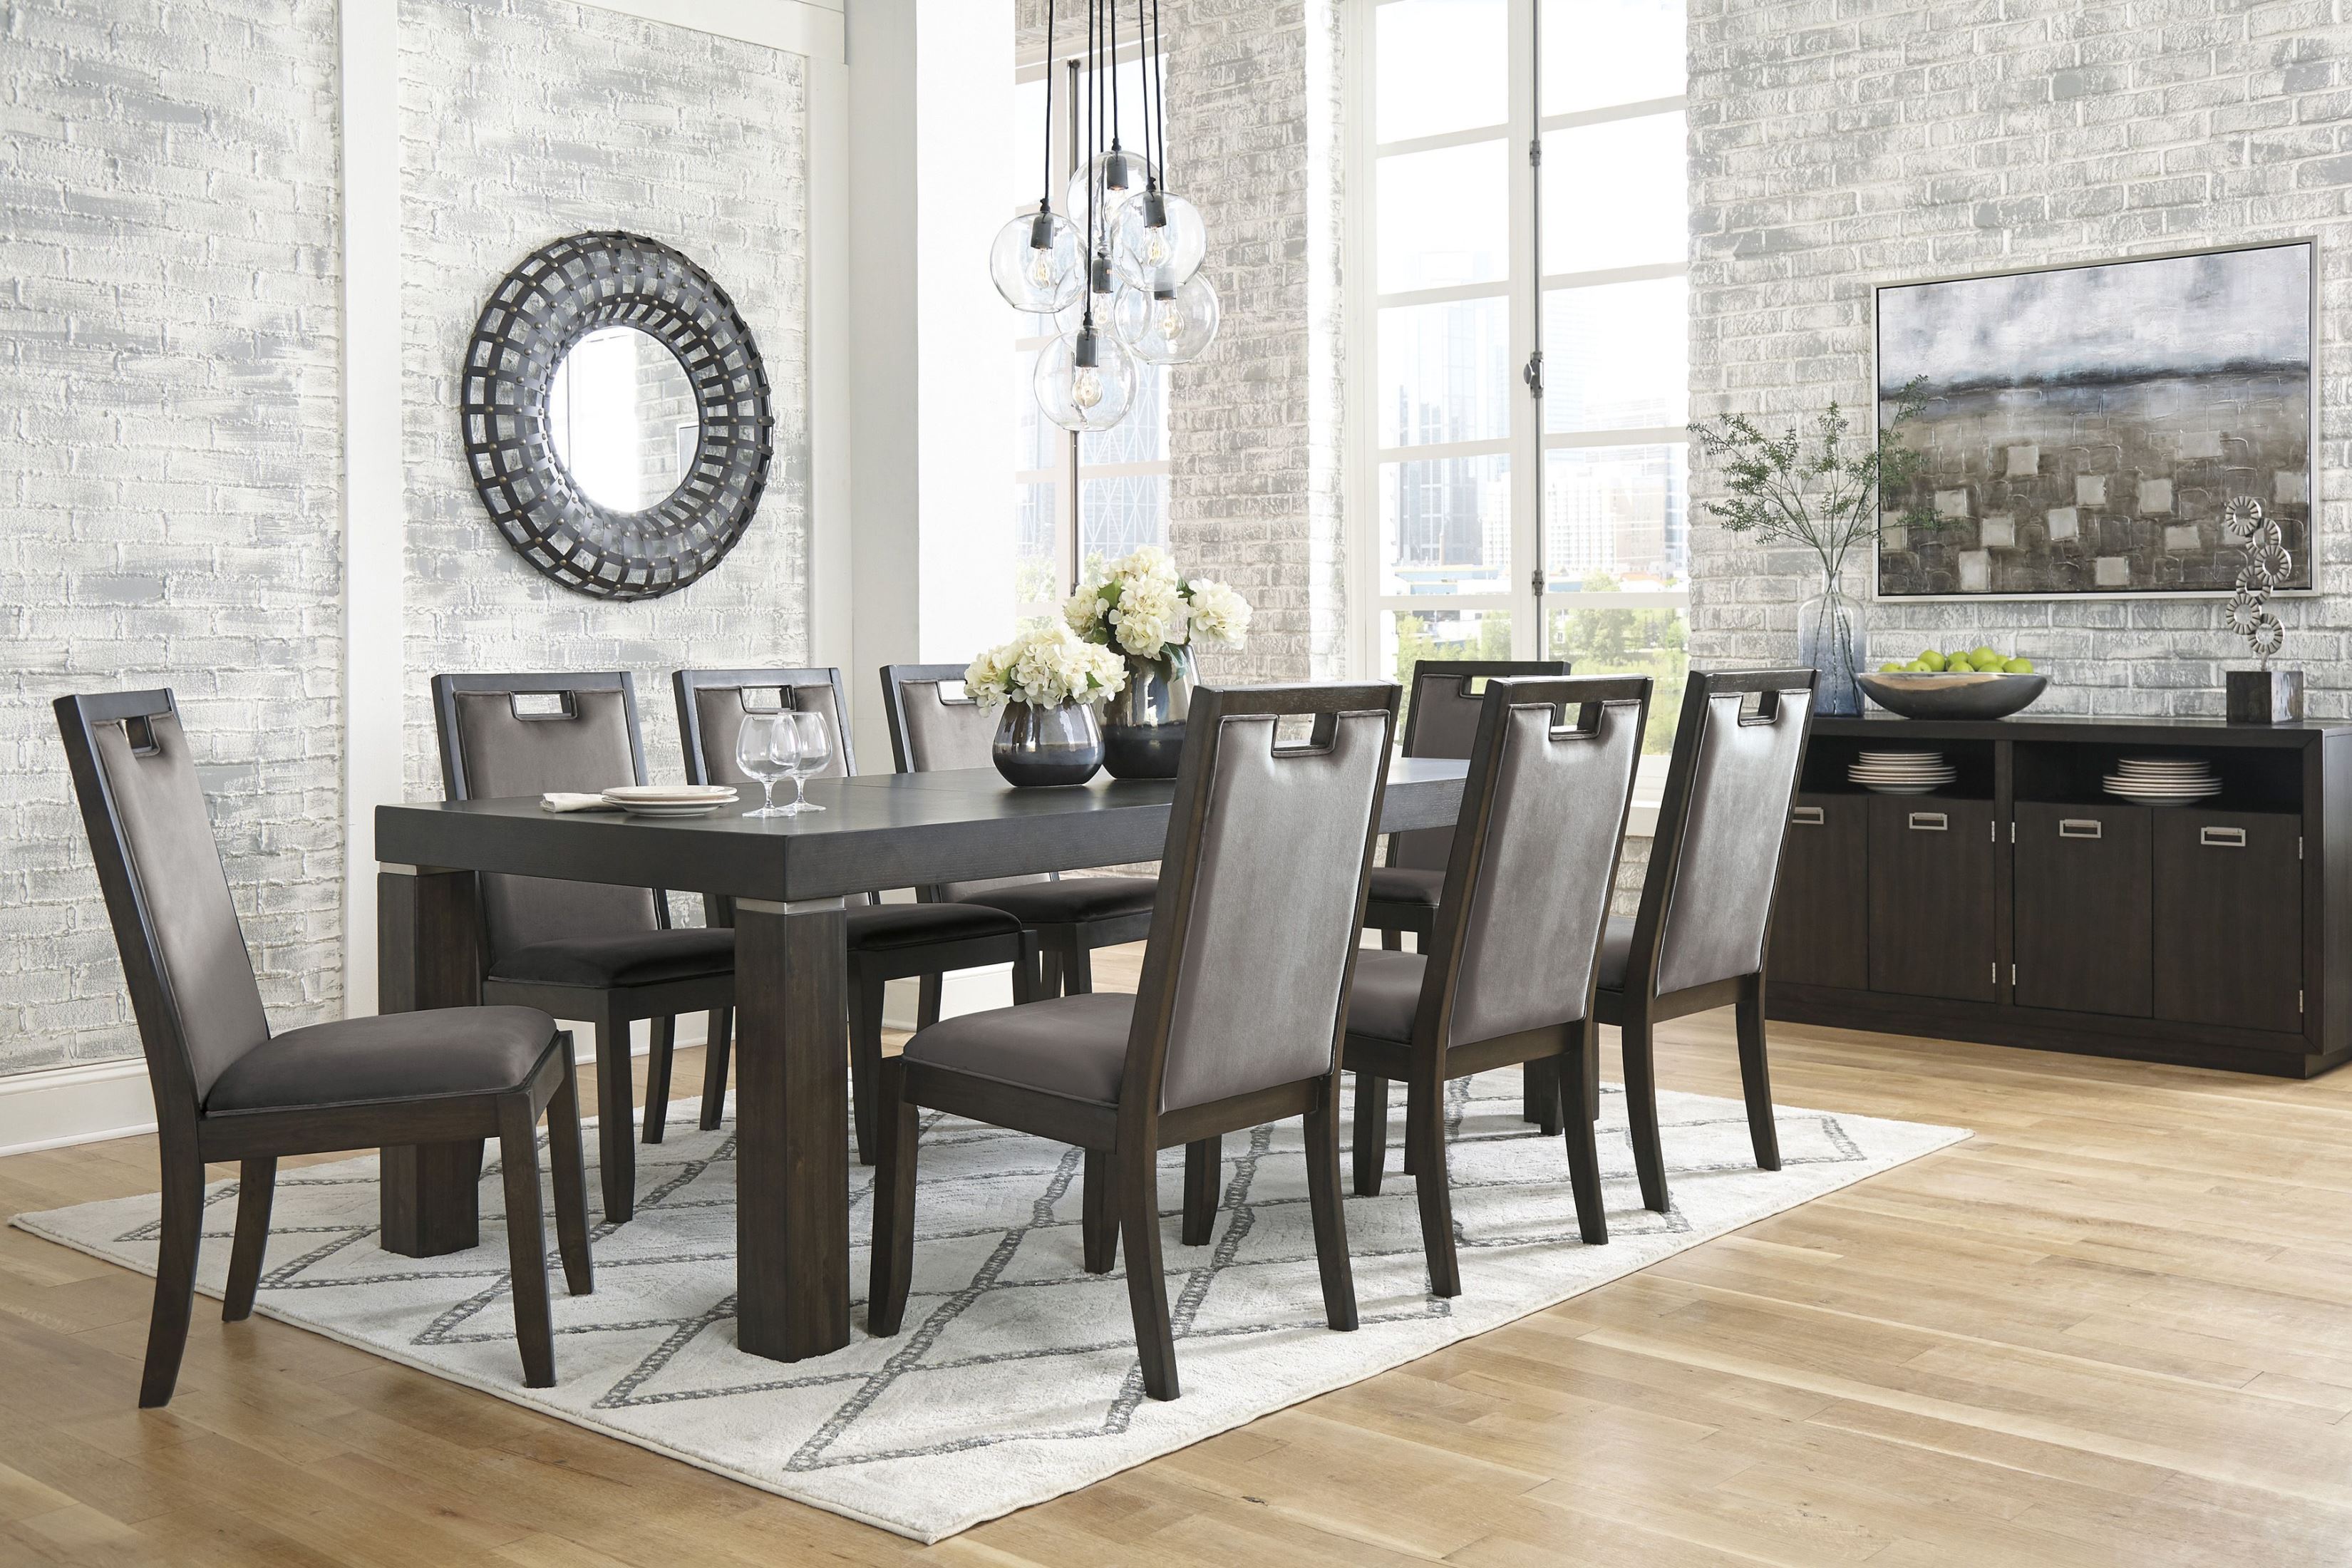 brown themed dining room